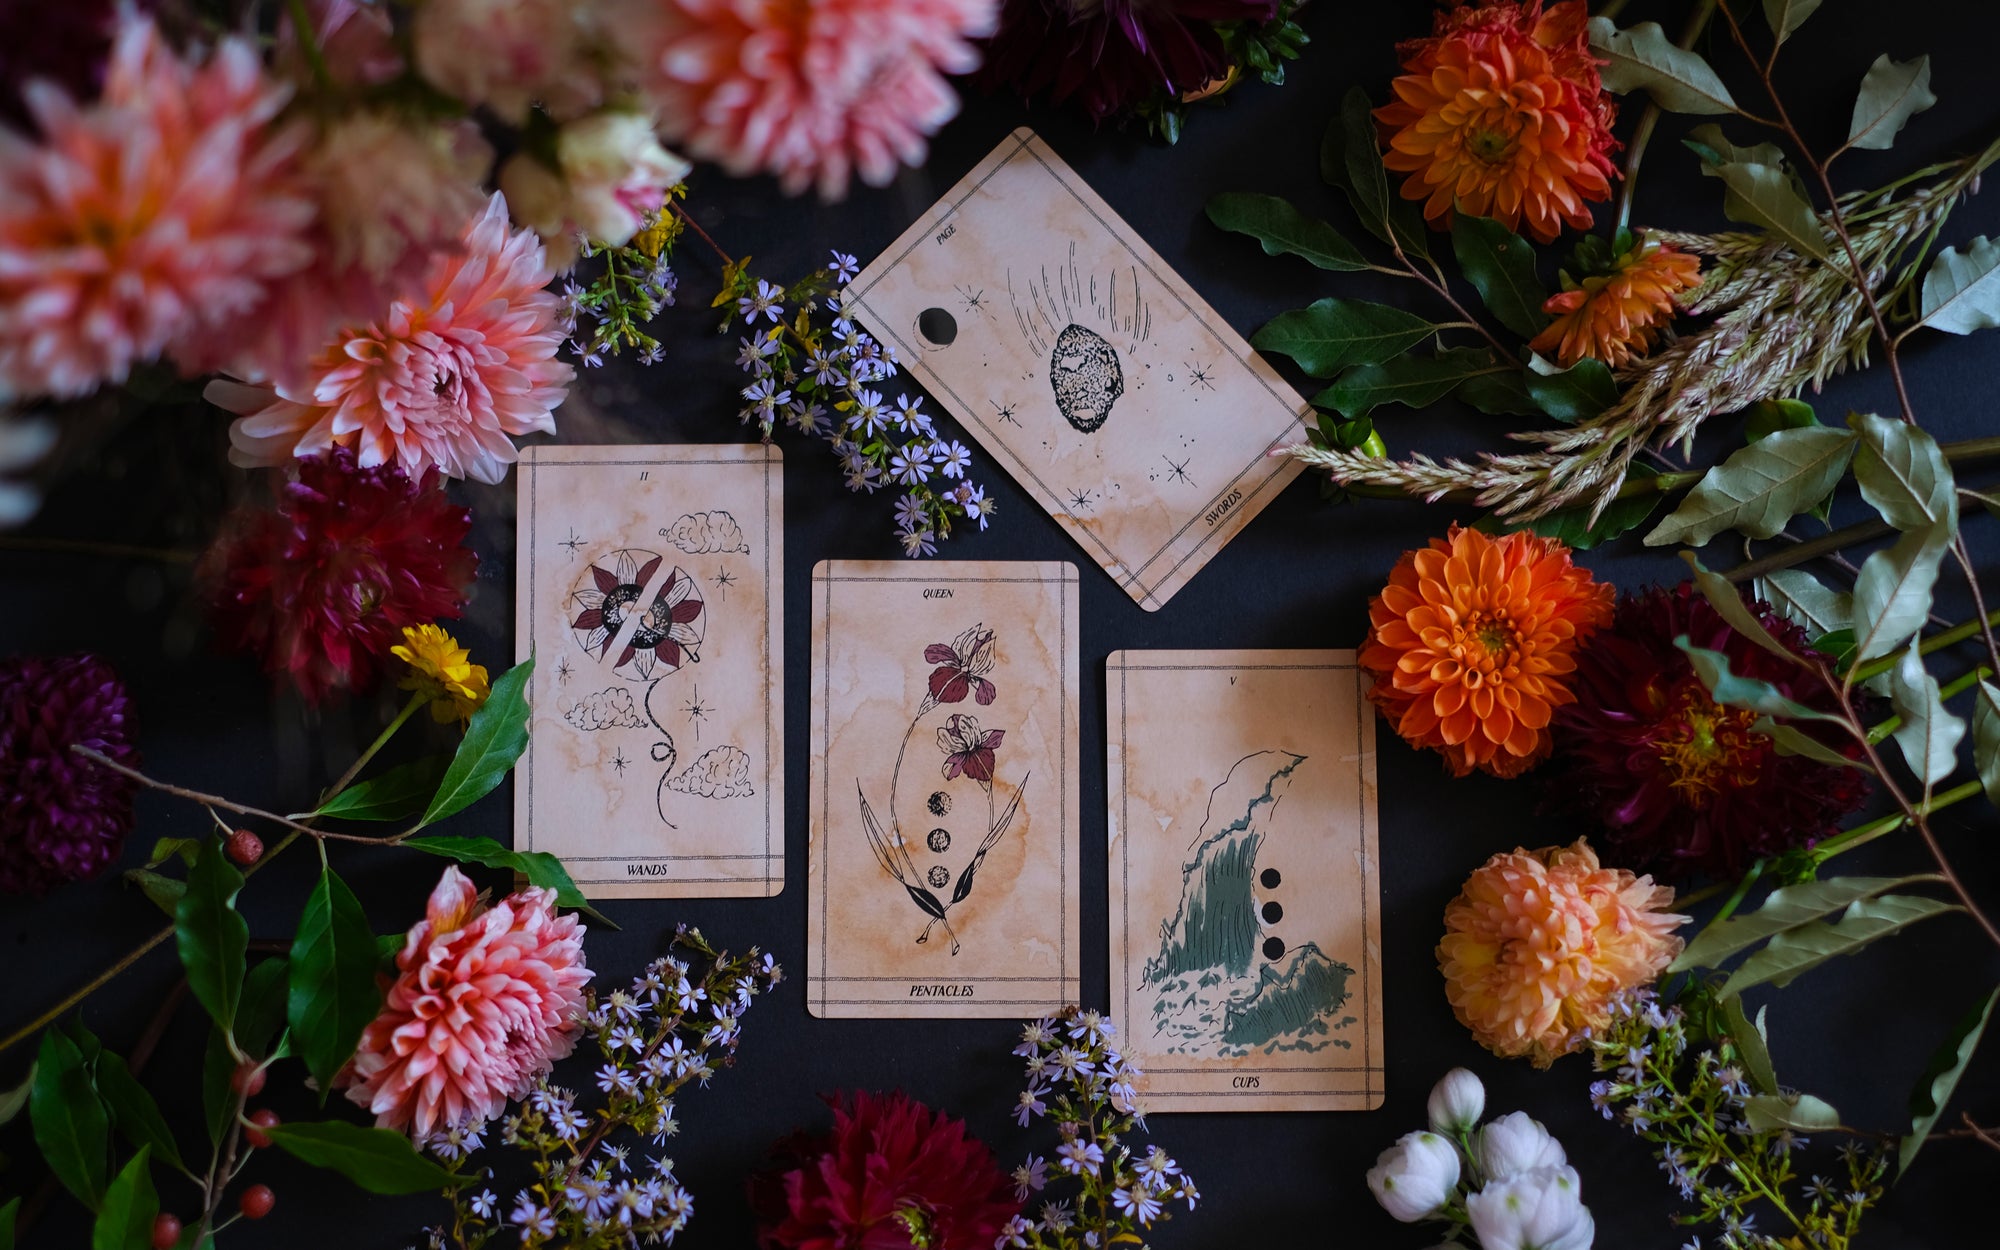 Ad Orbita Tarot is rooted in the plants and planets. Through 78 hand-illustrated cards, this botanical tarot deck journeys through the elements, astrology, the garden and the stars.